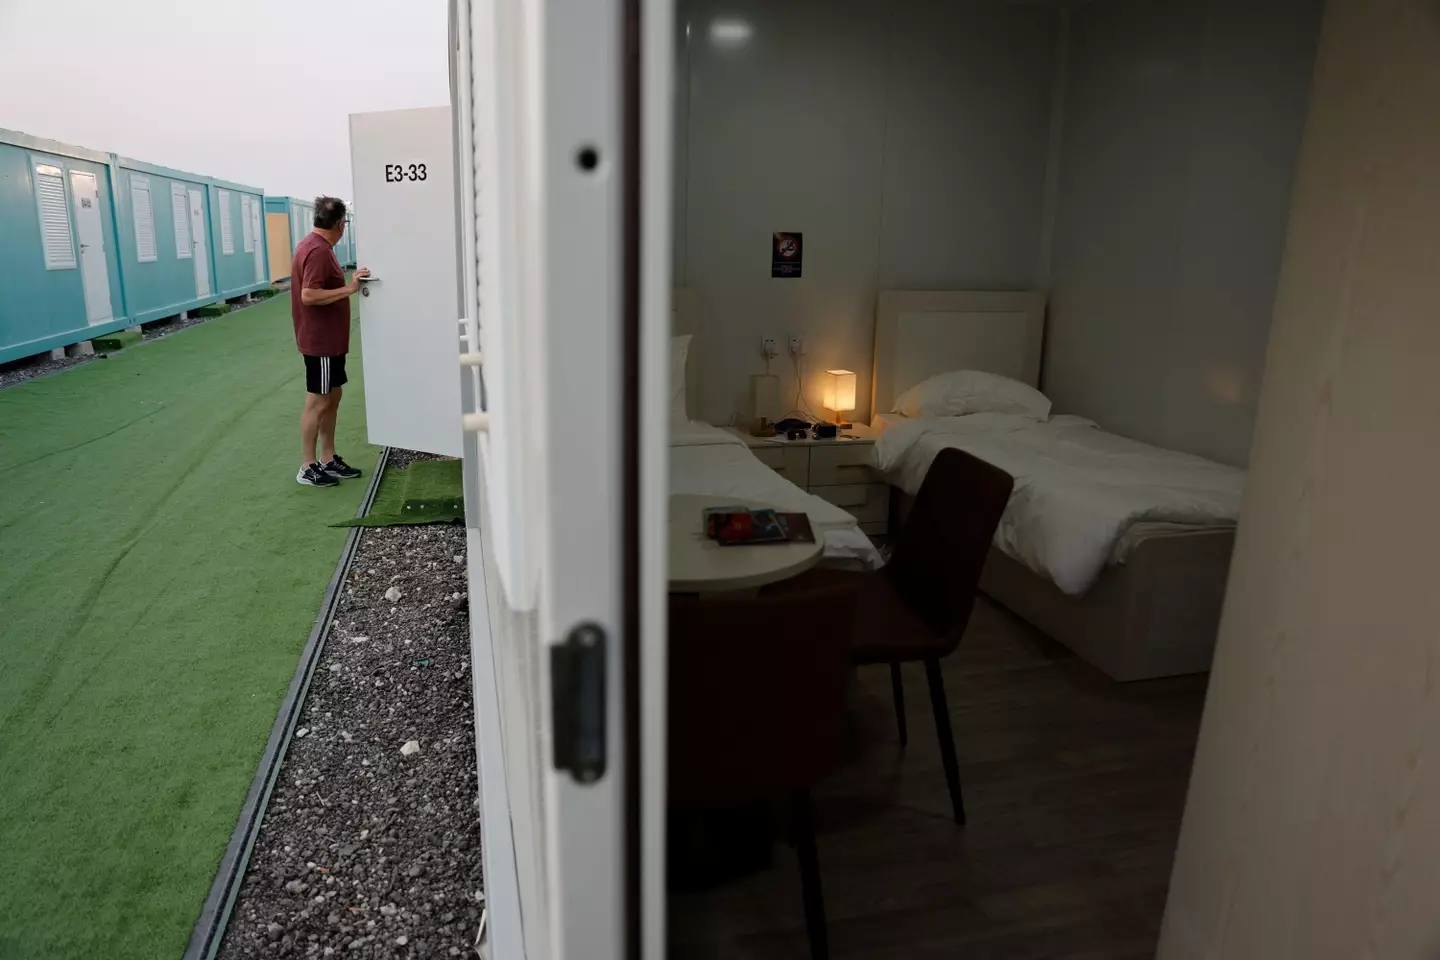 Fan accommodation at the World Cup in Qatar has come under scathing criticism. Image: Alamy